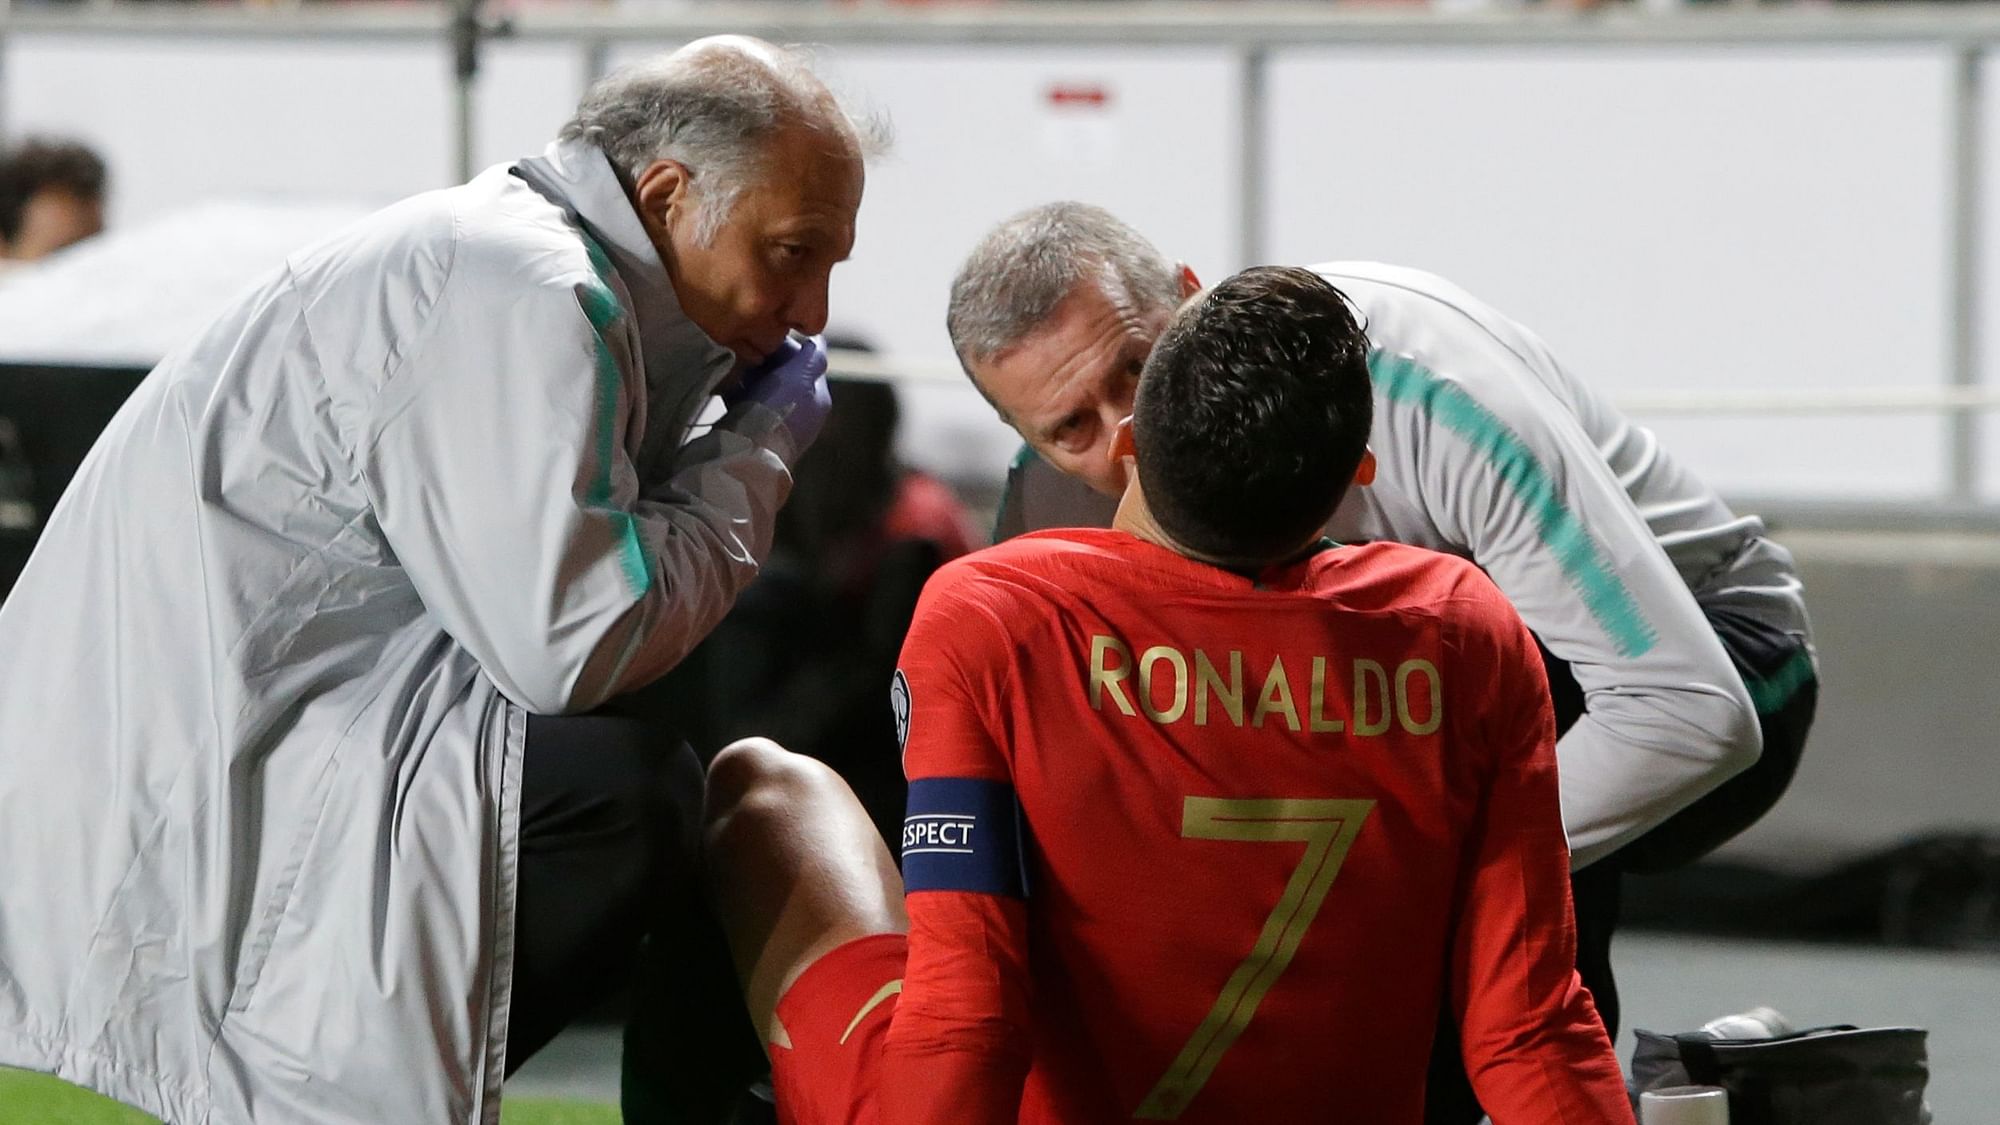 Team doctors said Ronaldo will undergo tests, but the star forward was not too concerned.